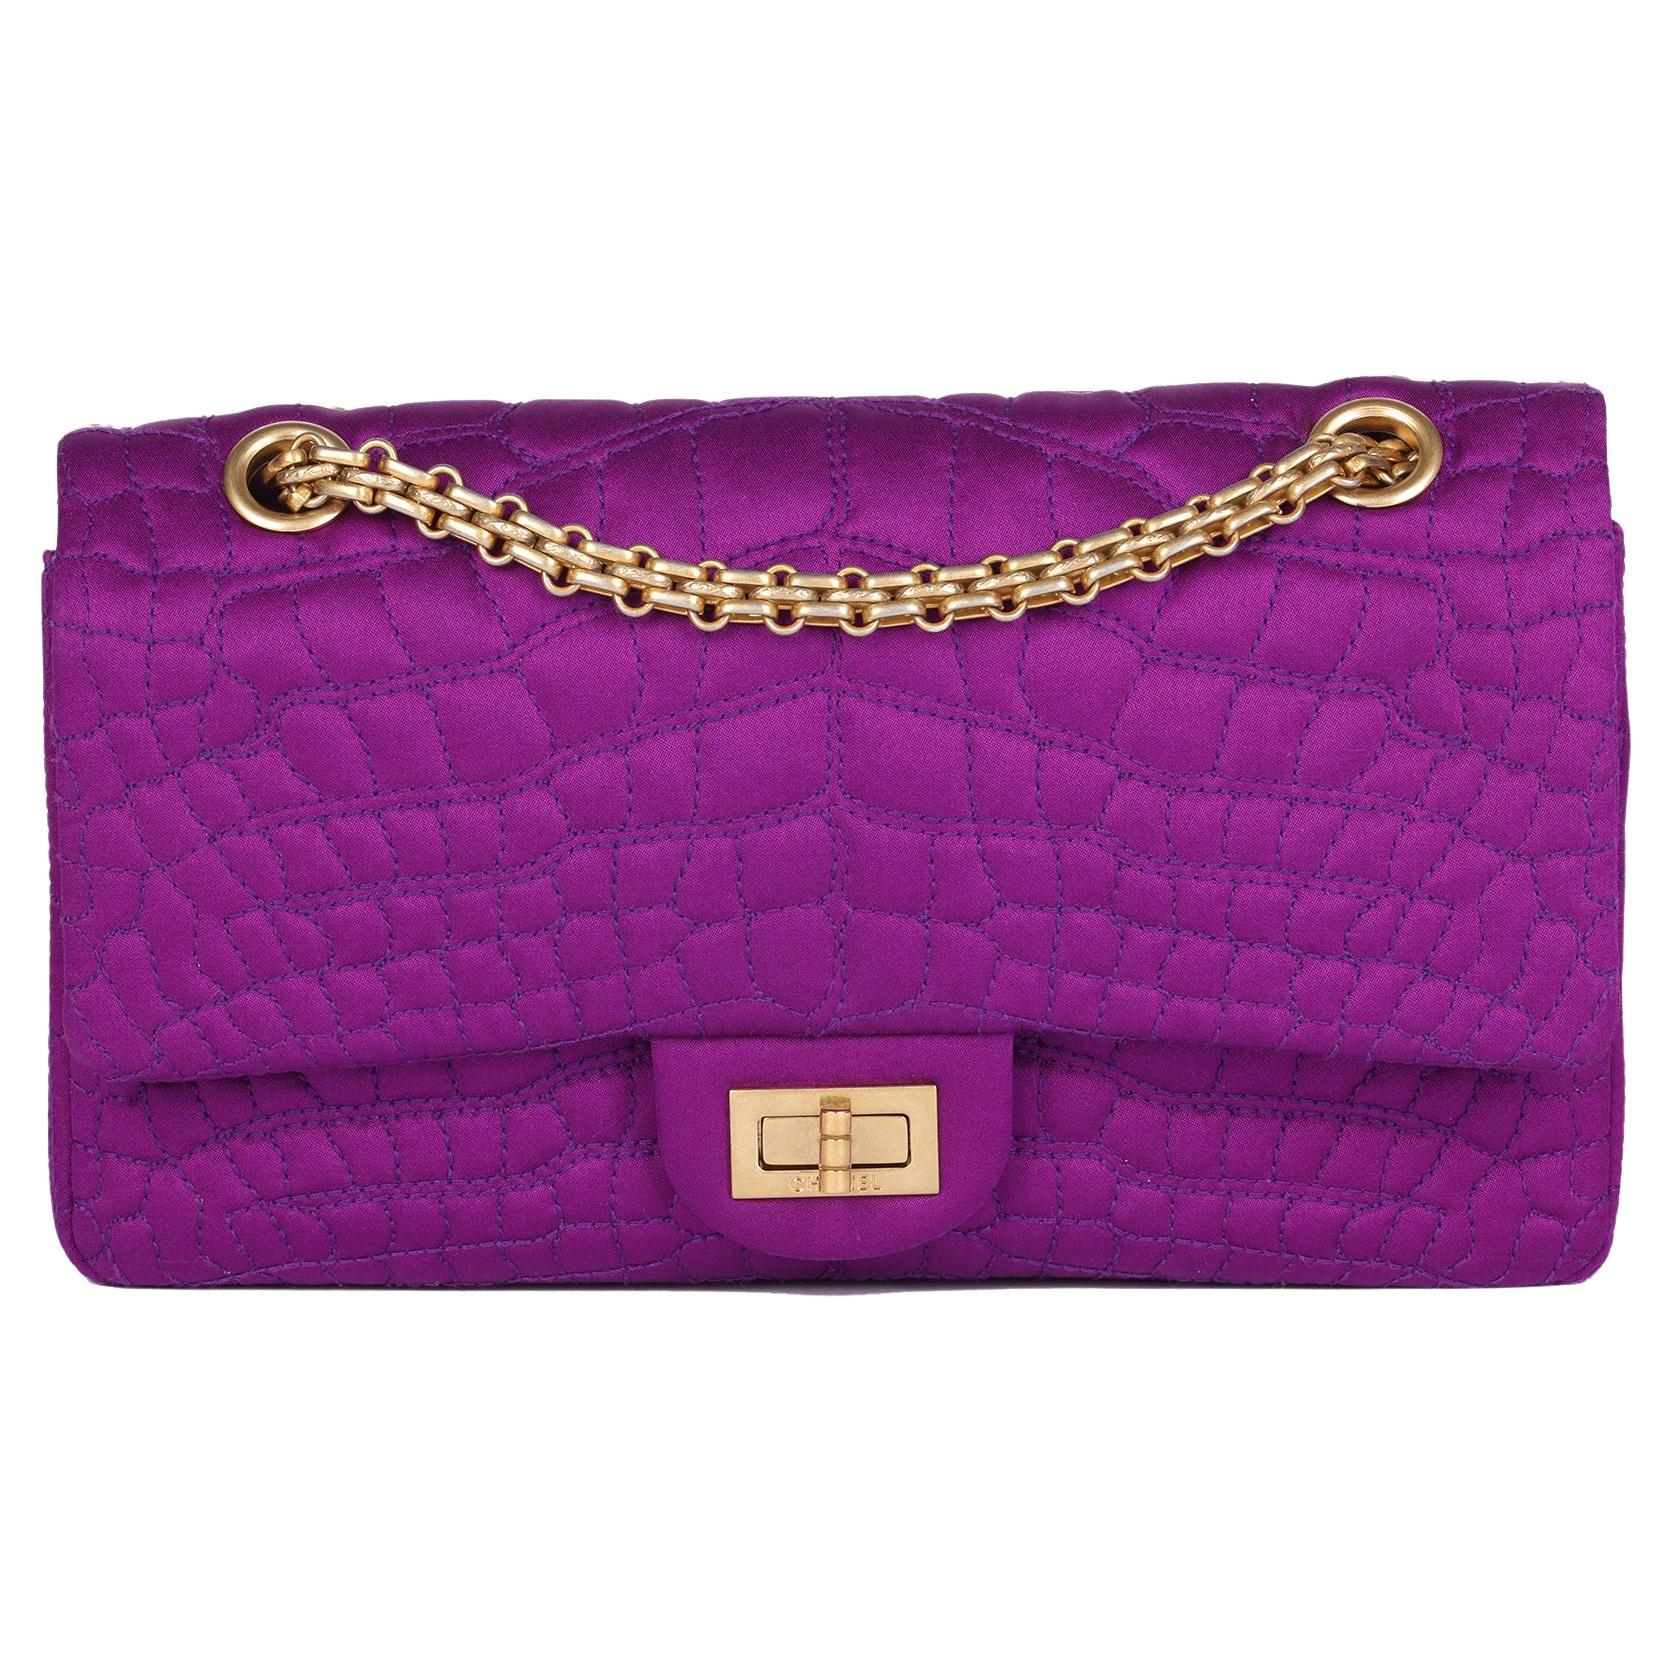 Purple Crocodile Quilted Satin East West 2.55 Reissue Double Flap Bag  Antique Gold Hardware and Card Holder Gold Hardware, 1991-1994 and  2006-2008, Handbags & Accessories, 2022